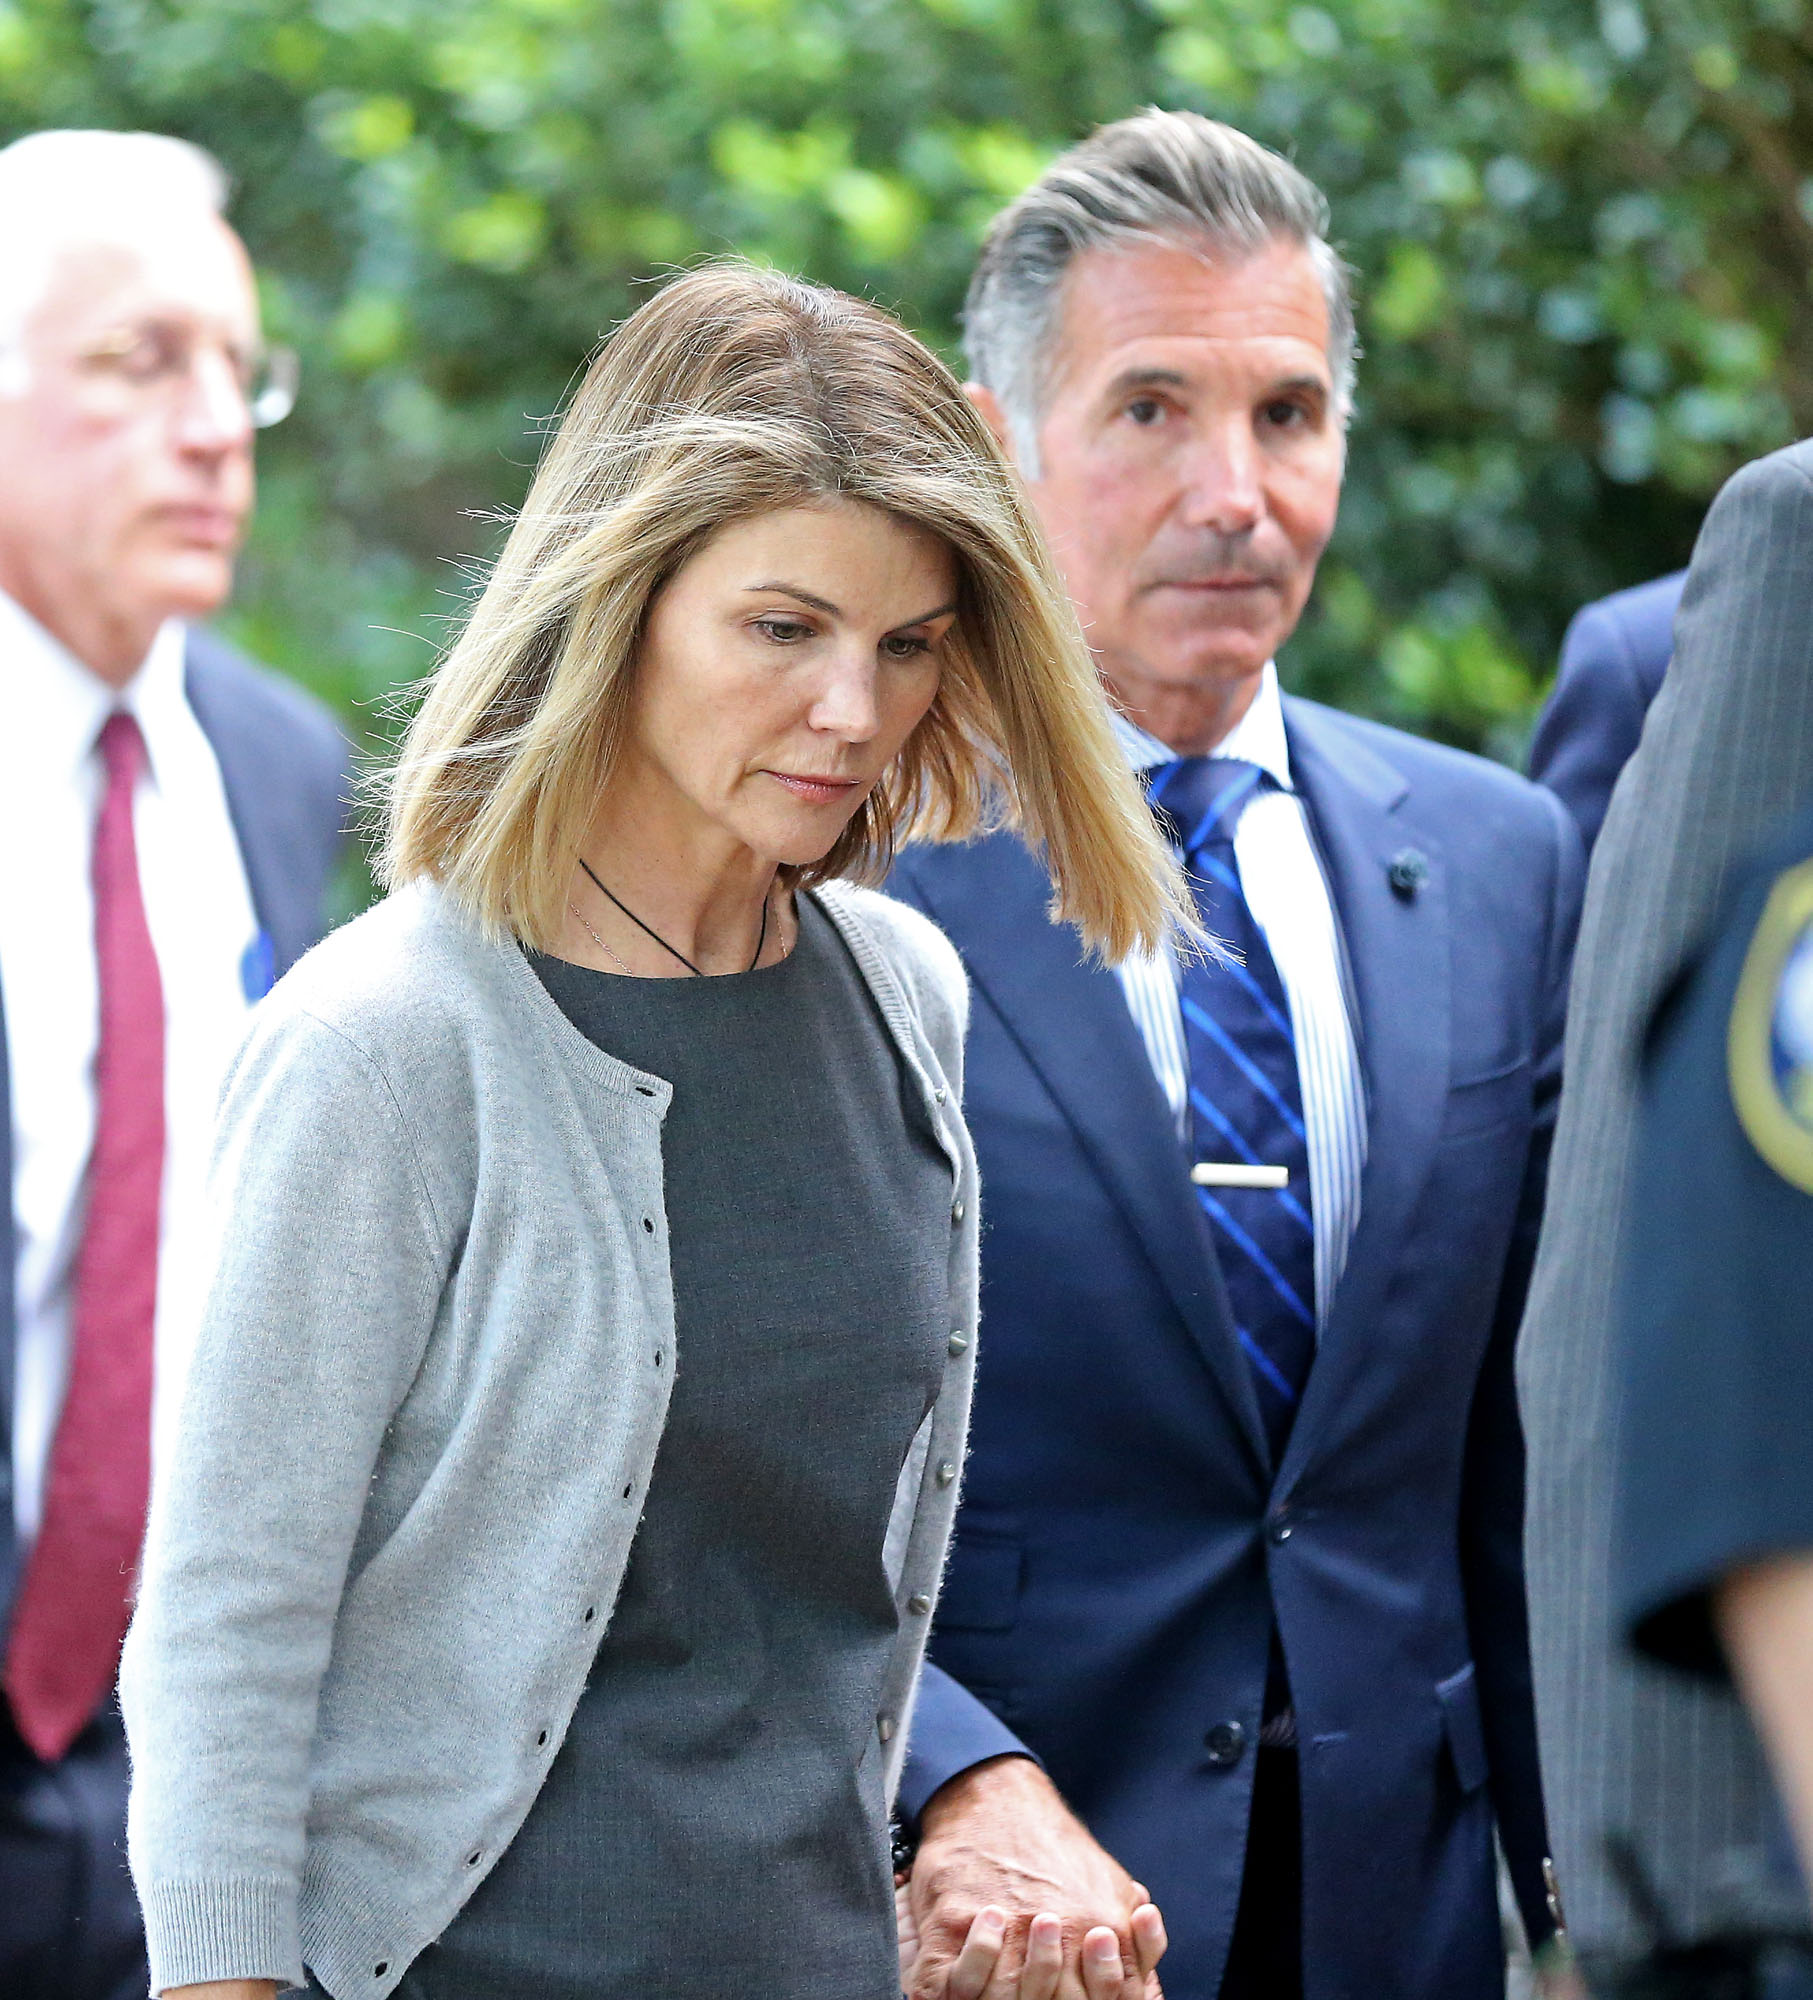 Lori Loughlin and Mossimo Giannulli on August 27, 2019 | Source: Getty Images